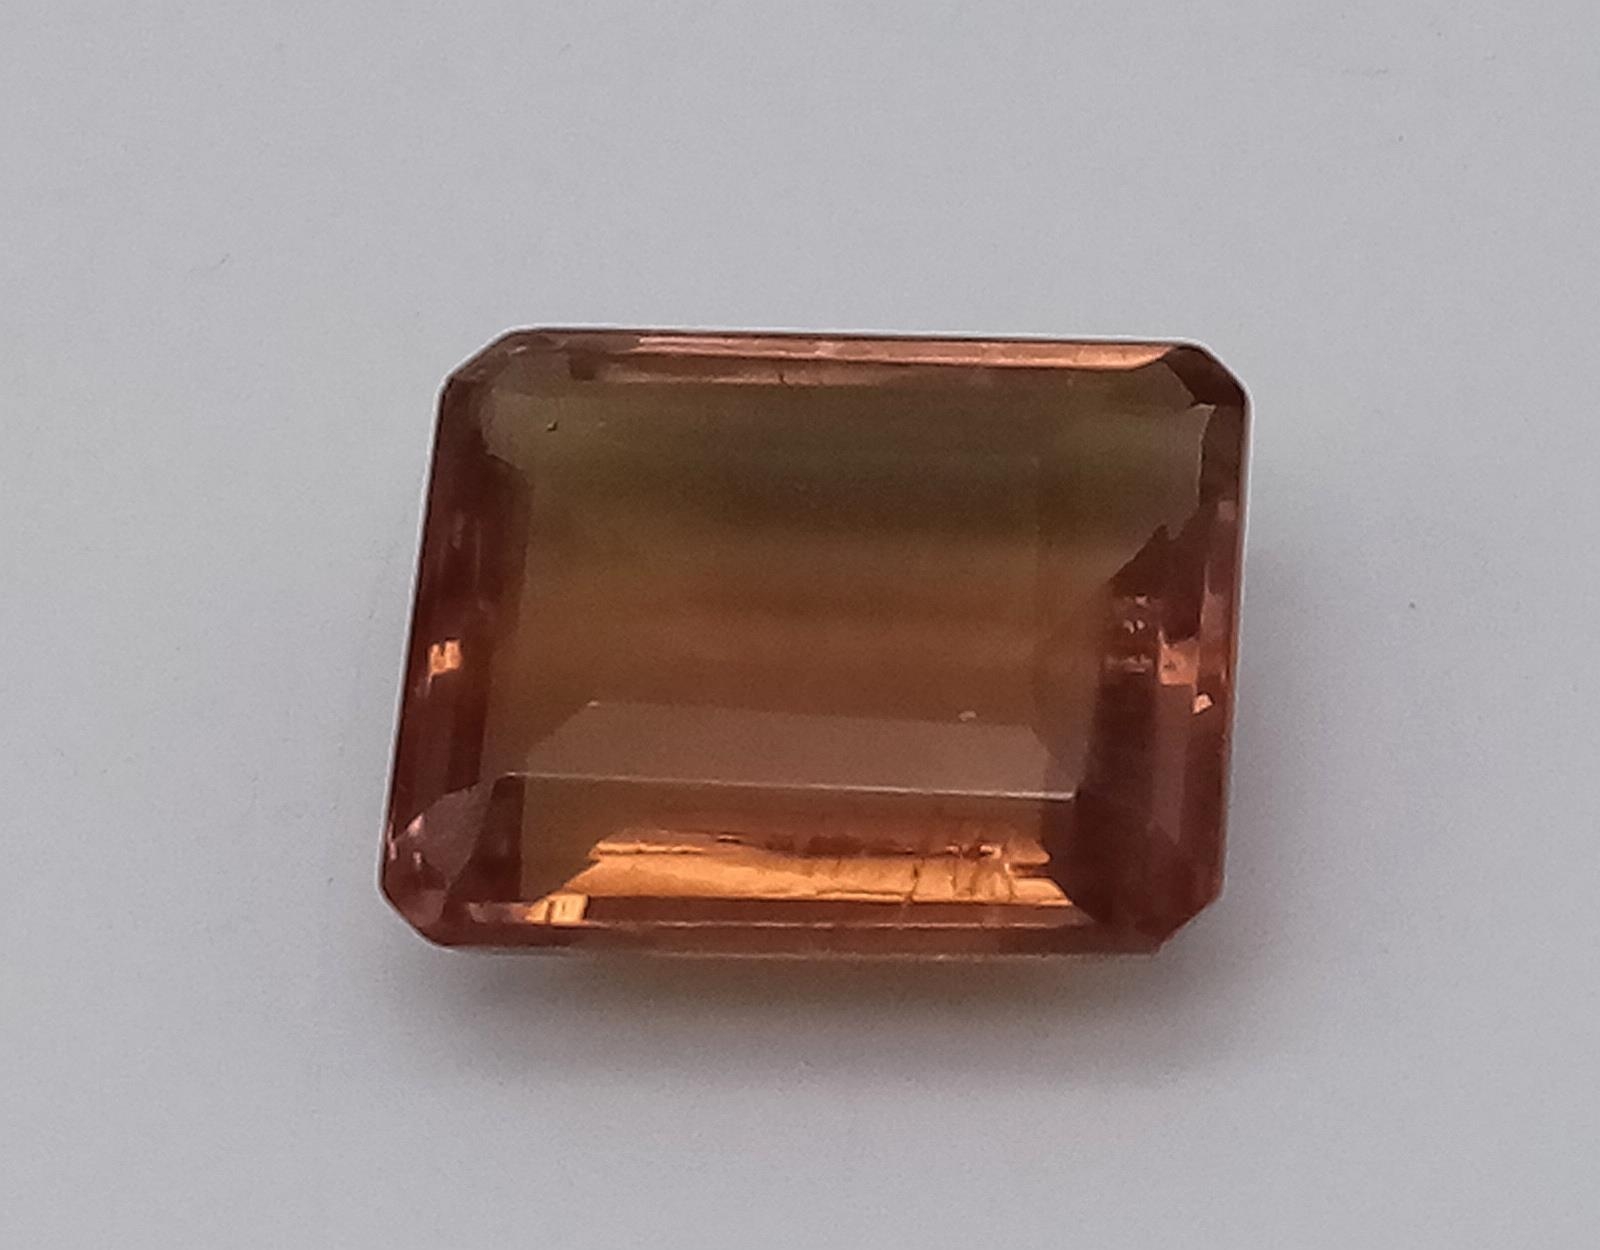 A very rare and highly collectable ZULTANITE (40 carats), emerald cut, with amazing colour